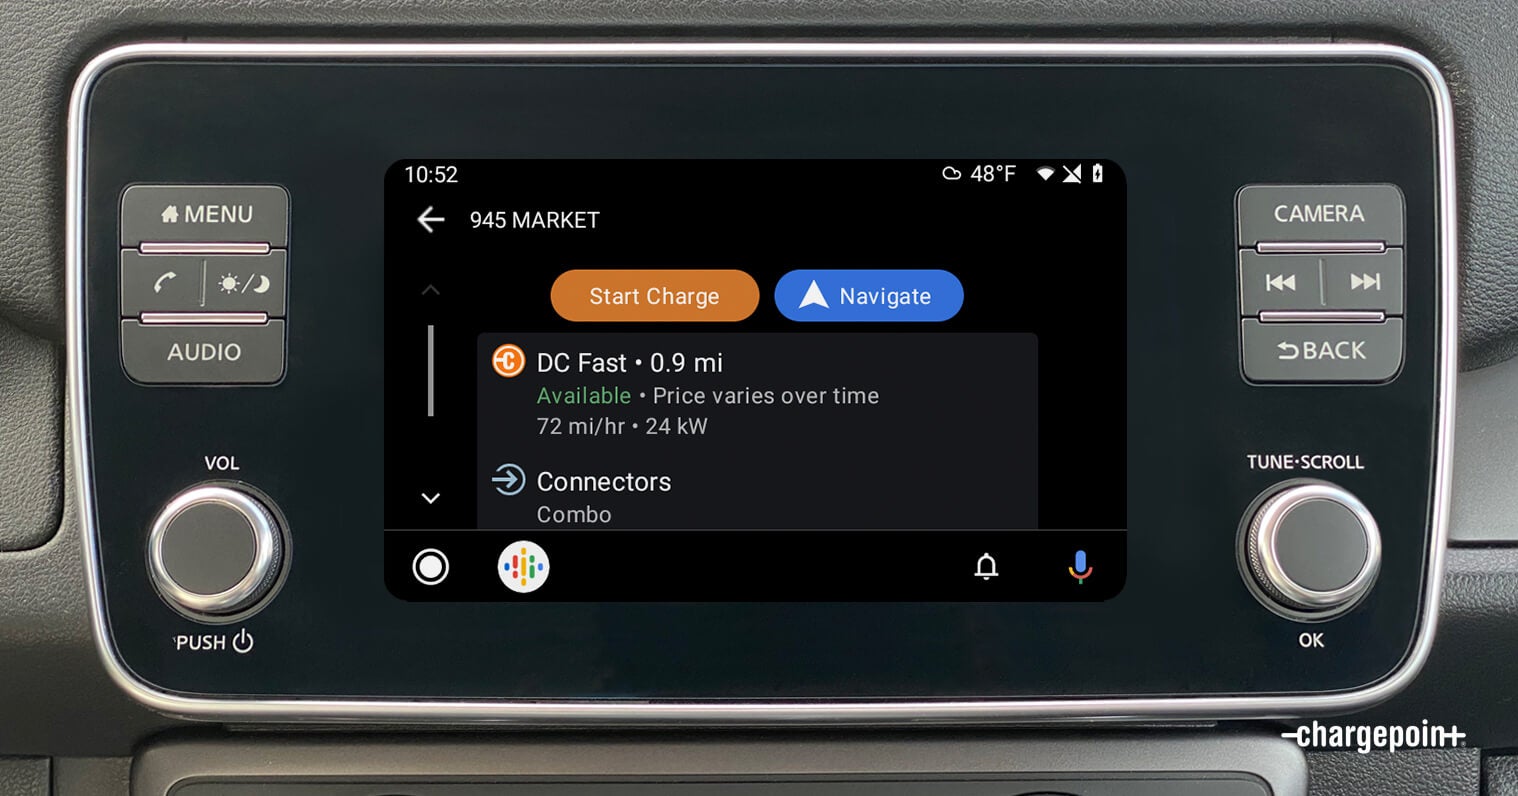 https://www.chargepoint.com/sites/default/files/inline-images/Android-Auto-Screens-Station-Details.jpg